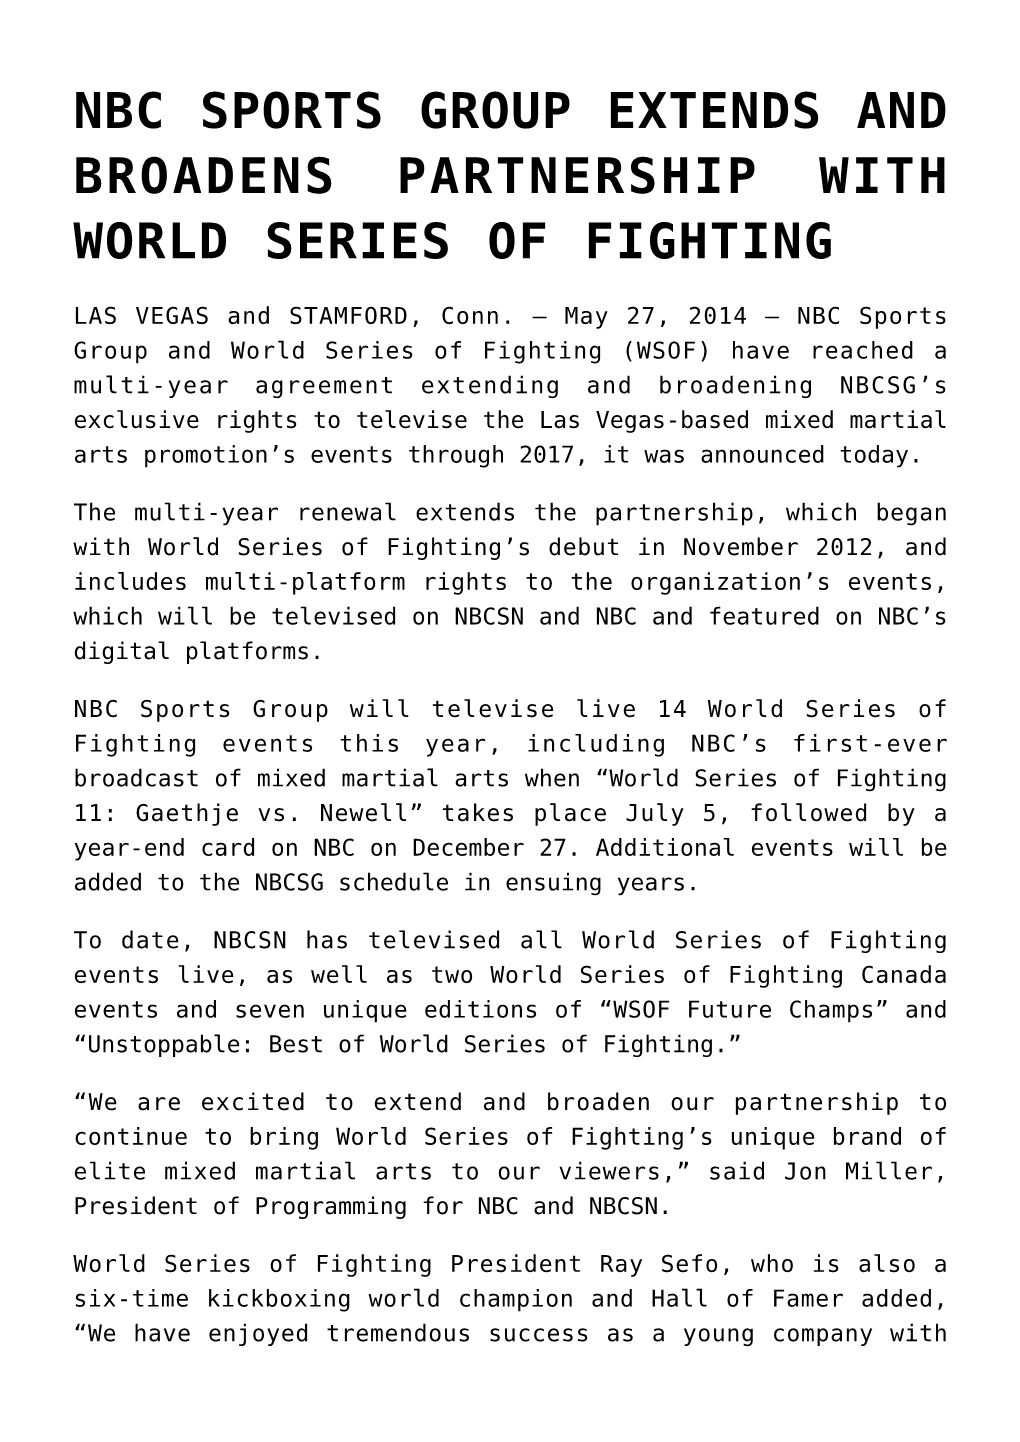 Nbc Sports Group Extends and Broadens Partnership with World Series of Fighting